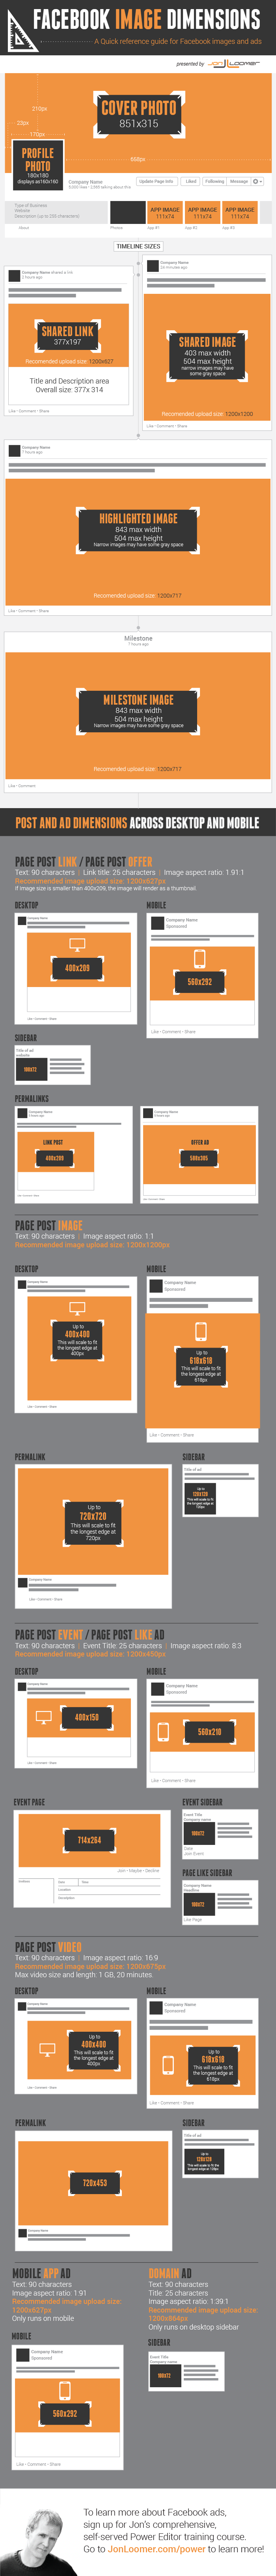 facebook image dimensions timeline newsfeed posts ads All Facebook Image Dimensions: Timeline, Posts, Ads [Infographic]